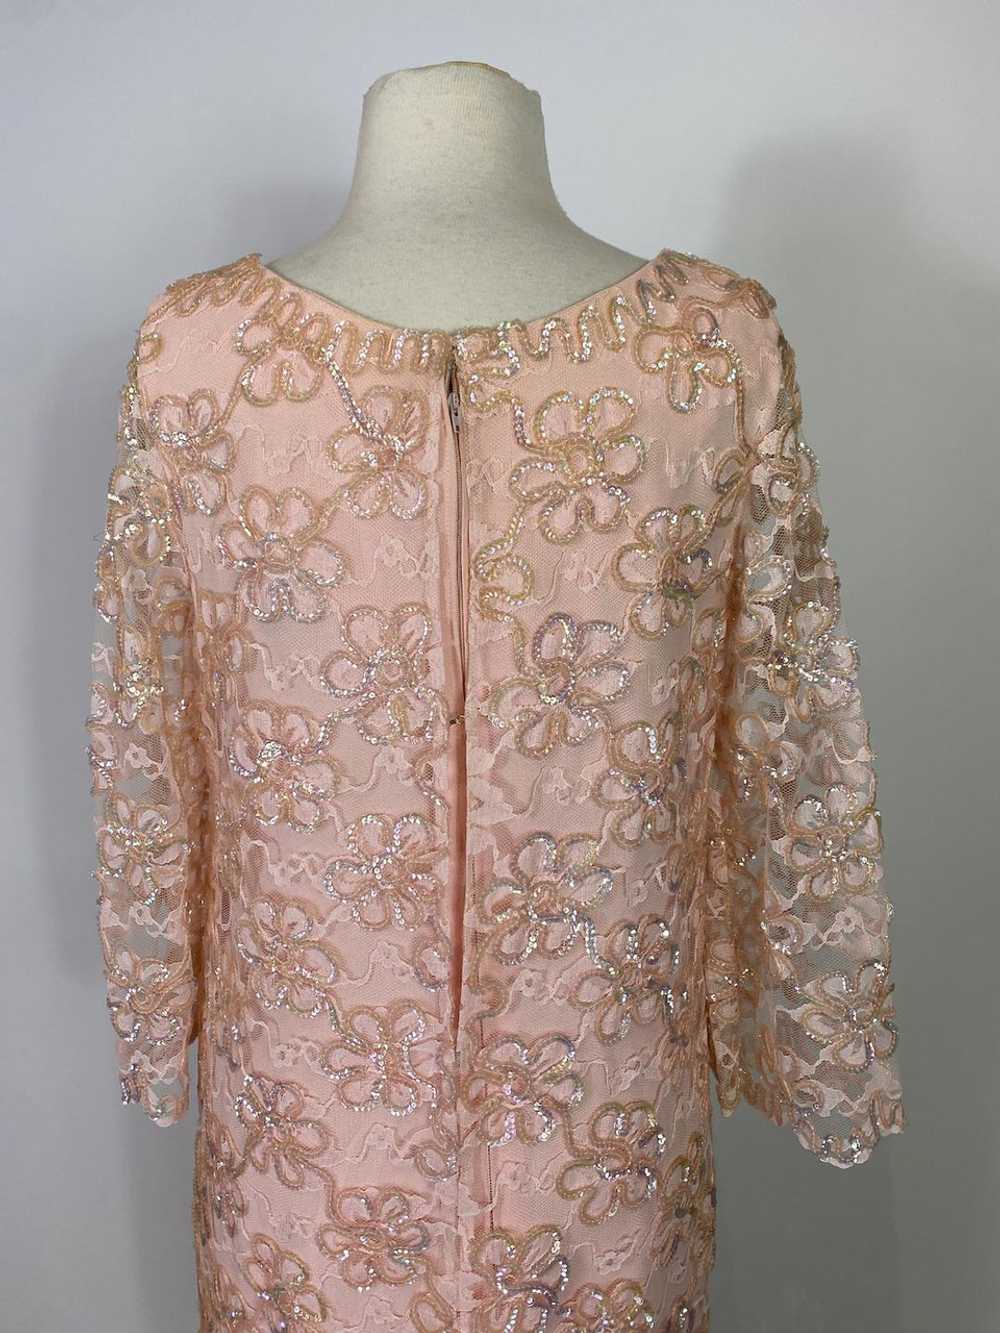 1960s Jr. Theme Pink Sequin and Lace Shift Dress - image 6